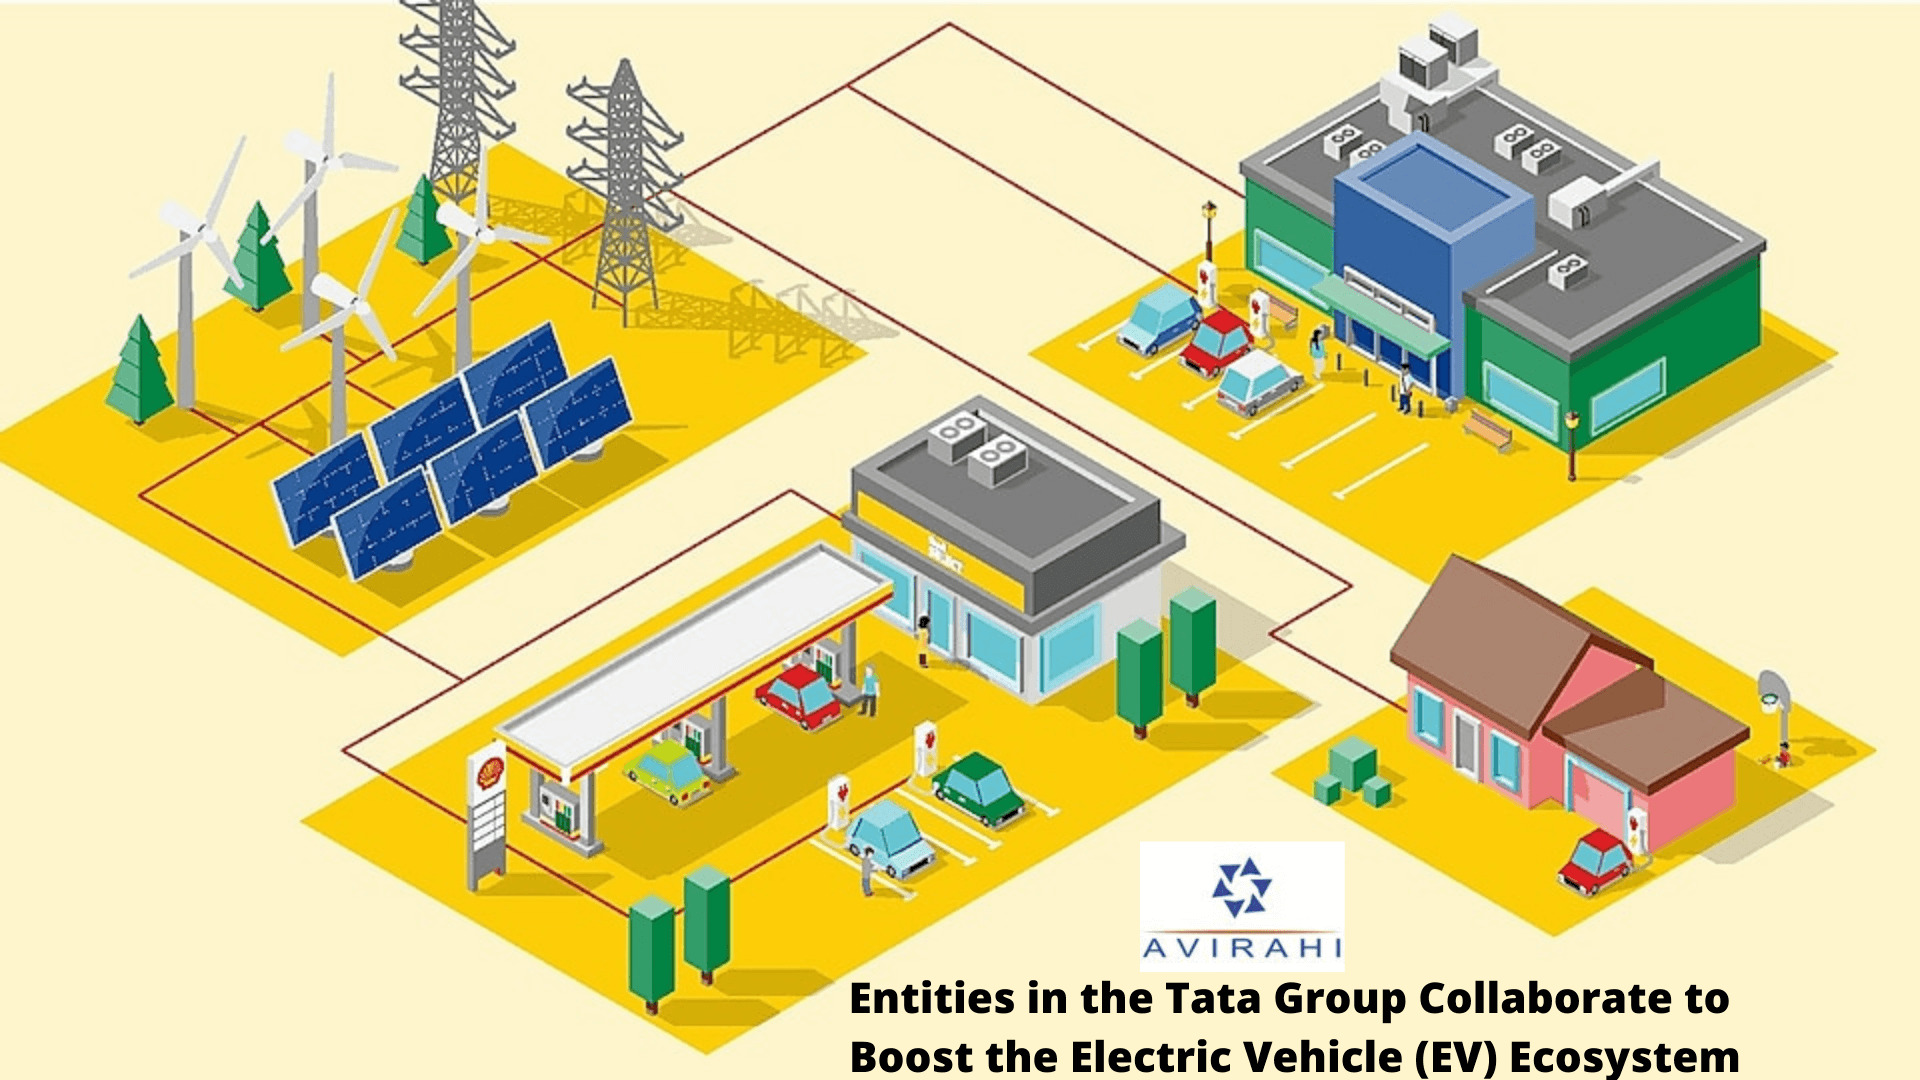 Entities in the Tata Group Collaborate to Boost the Electric Vehicle